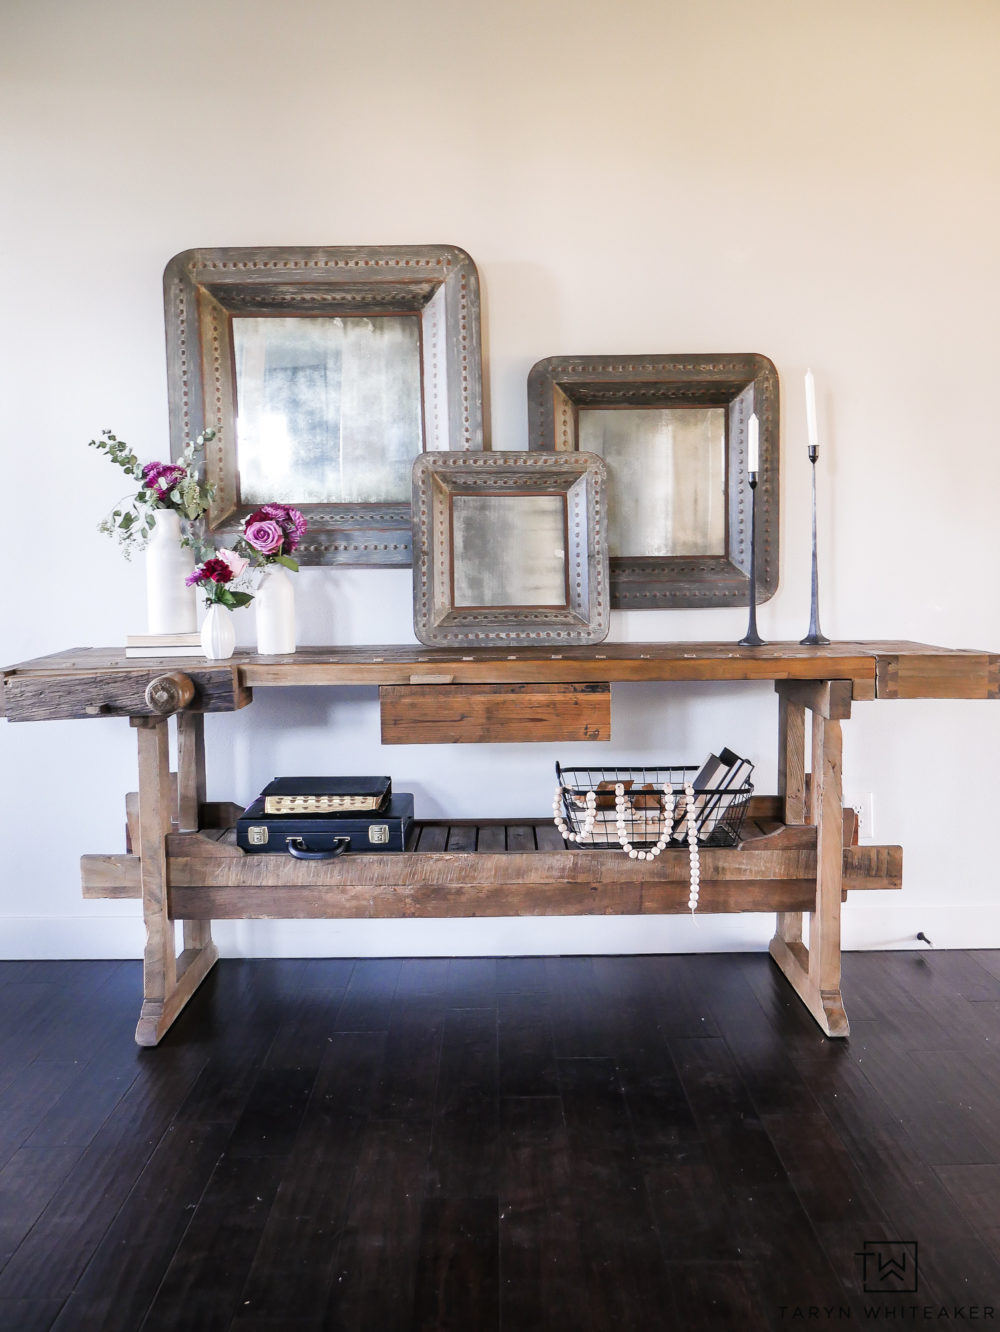 Give a welcoming look to your entry way with.a wood console table decorated with large scale items and soft fresh flowers. Mixing industrial and famine touches is a wonderful contrast.